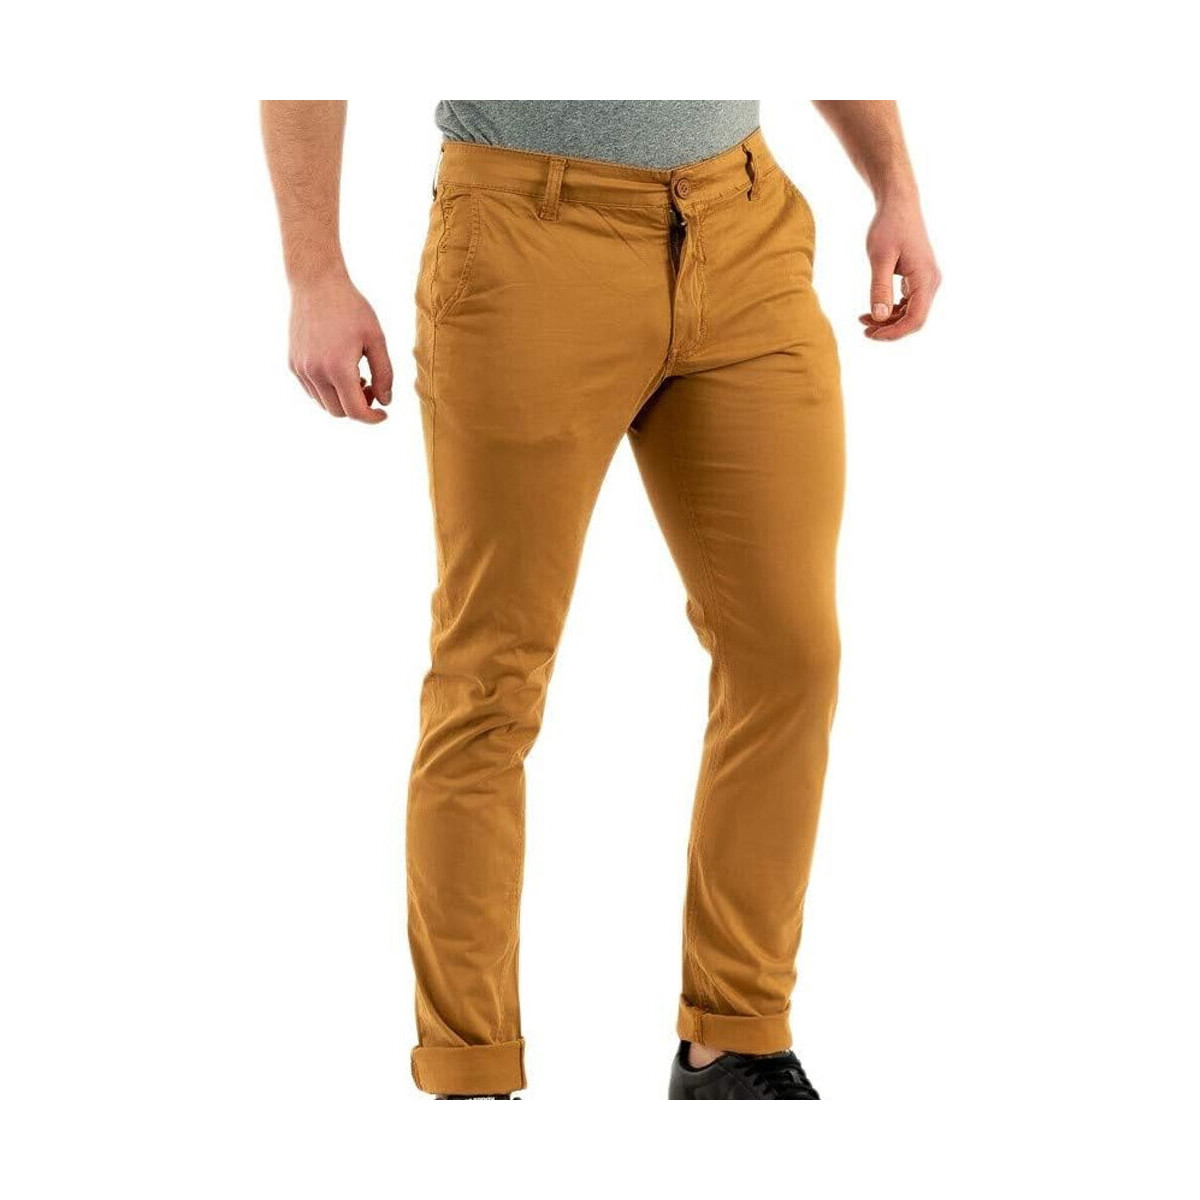 Vêtements Homme Chinos / Carrots Redskins RDS-HELLO Marron